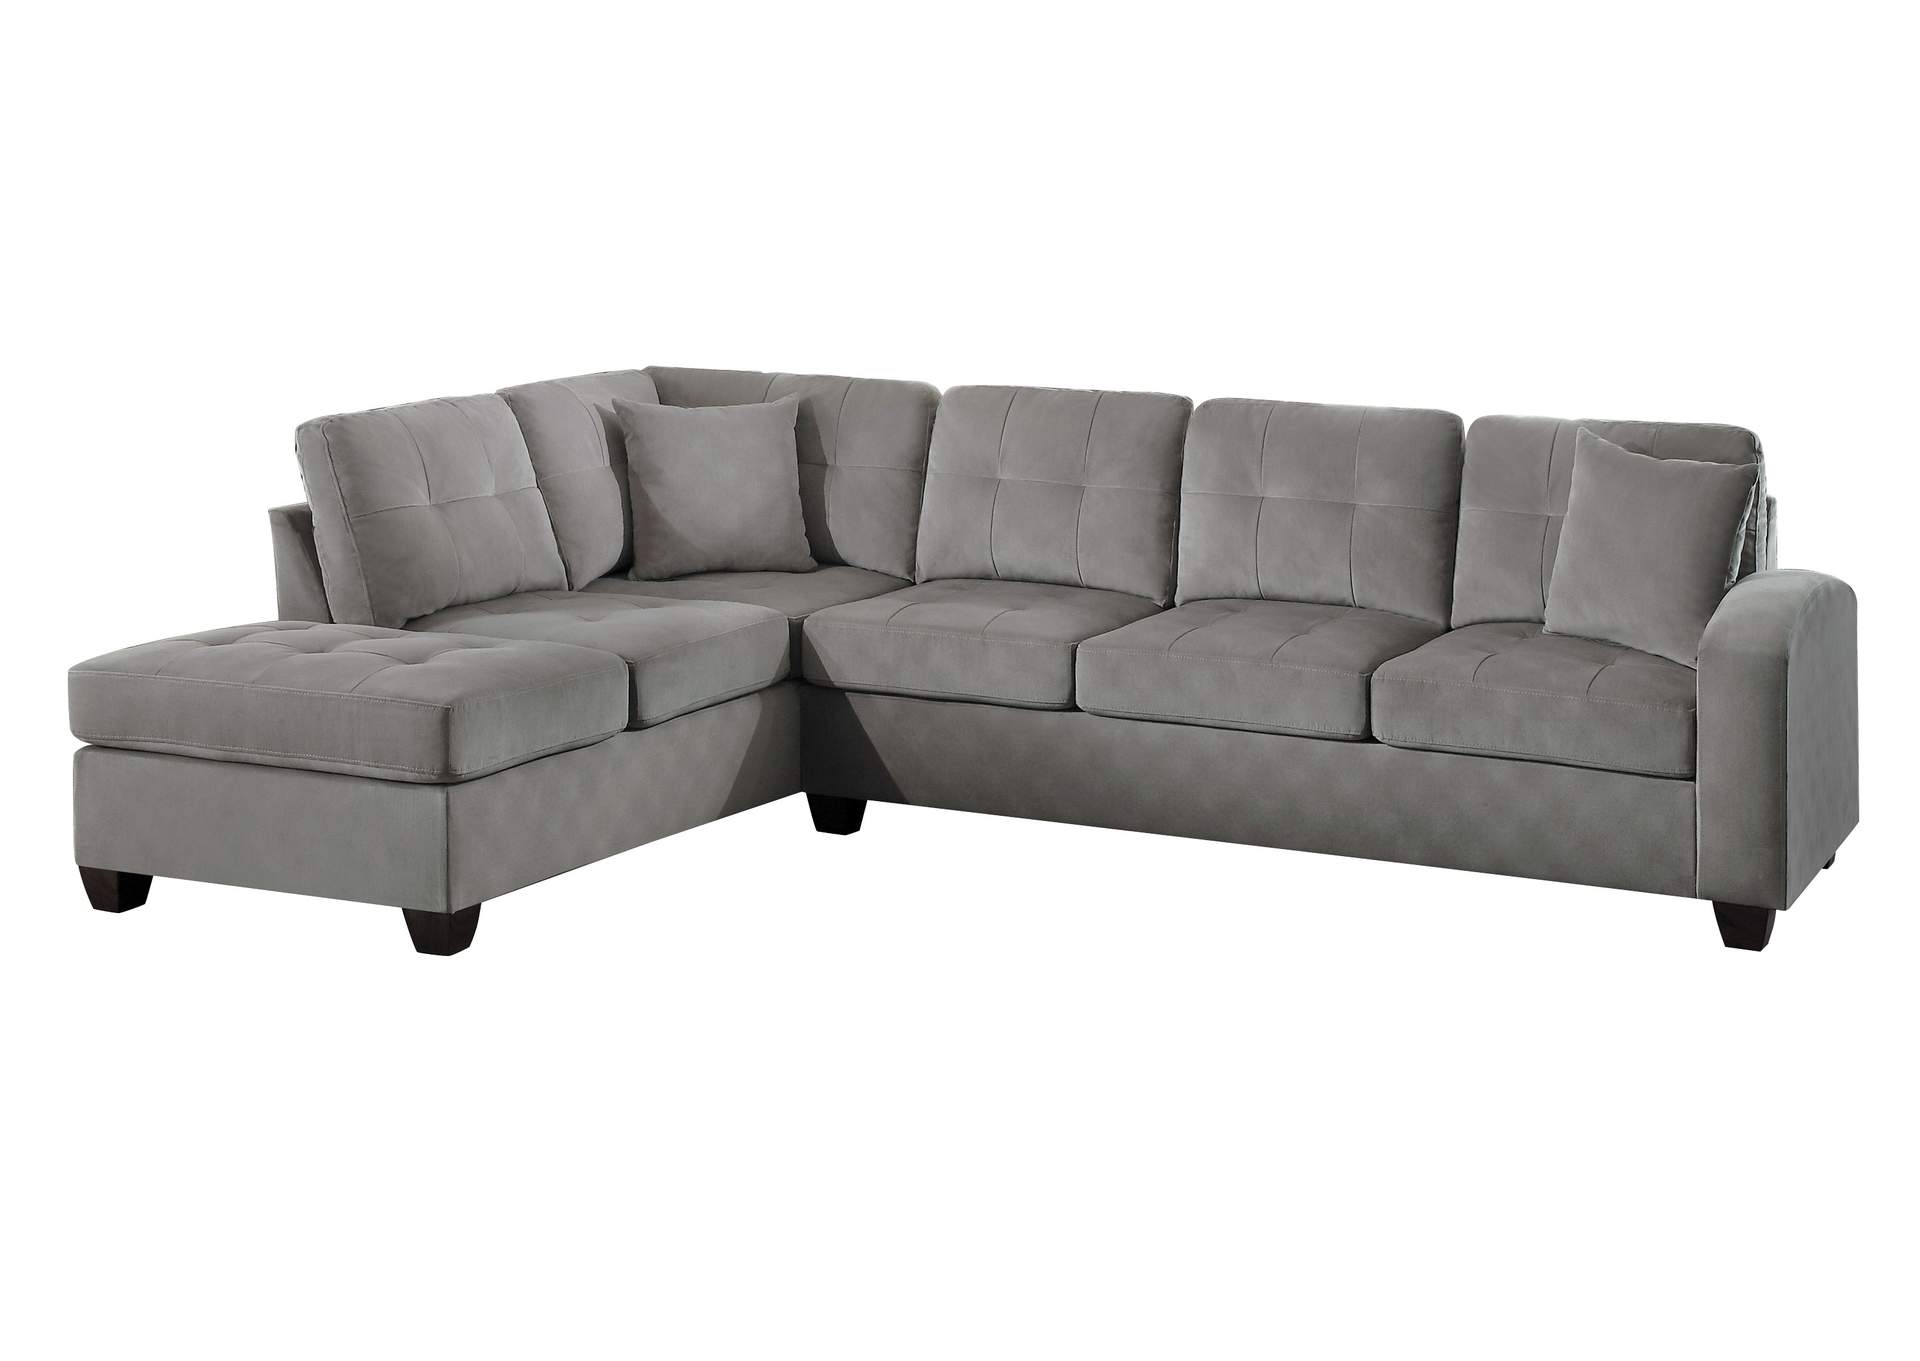 2-Piece Reversible Sectional,Homelegance